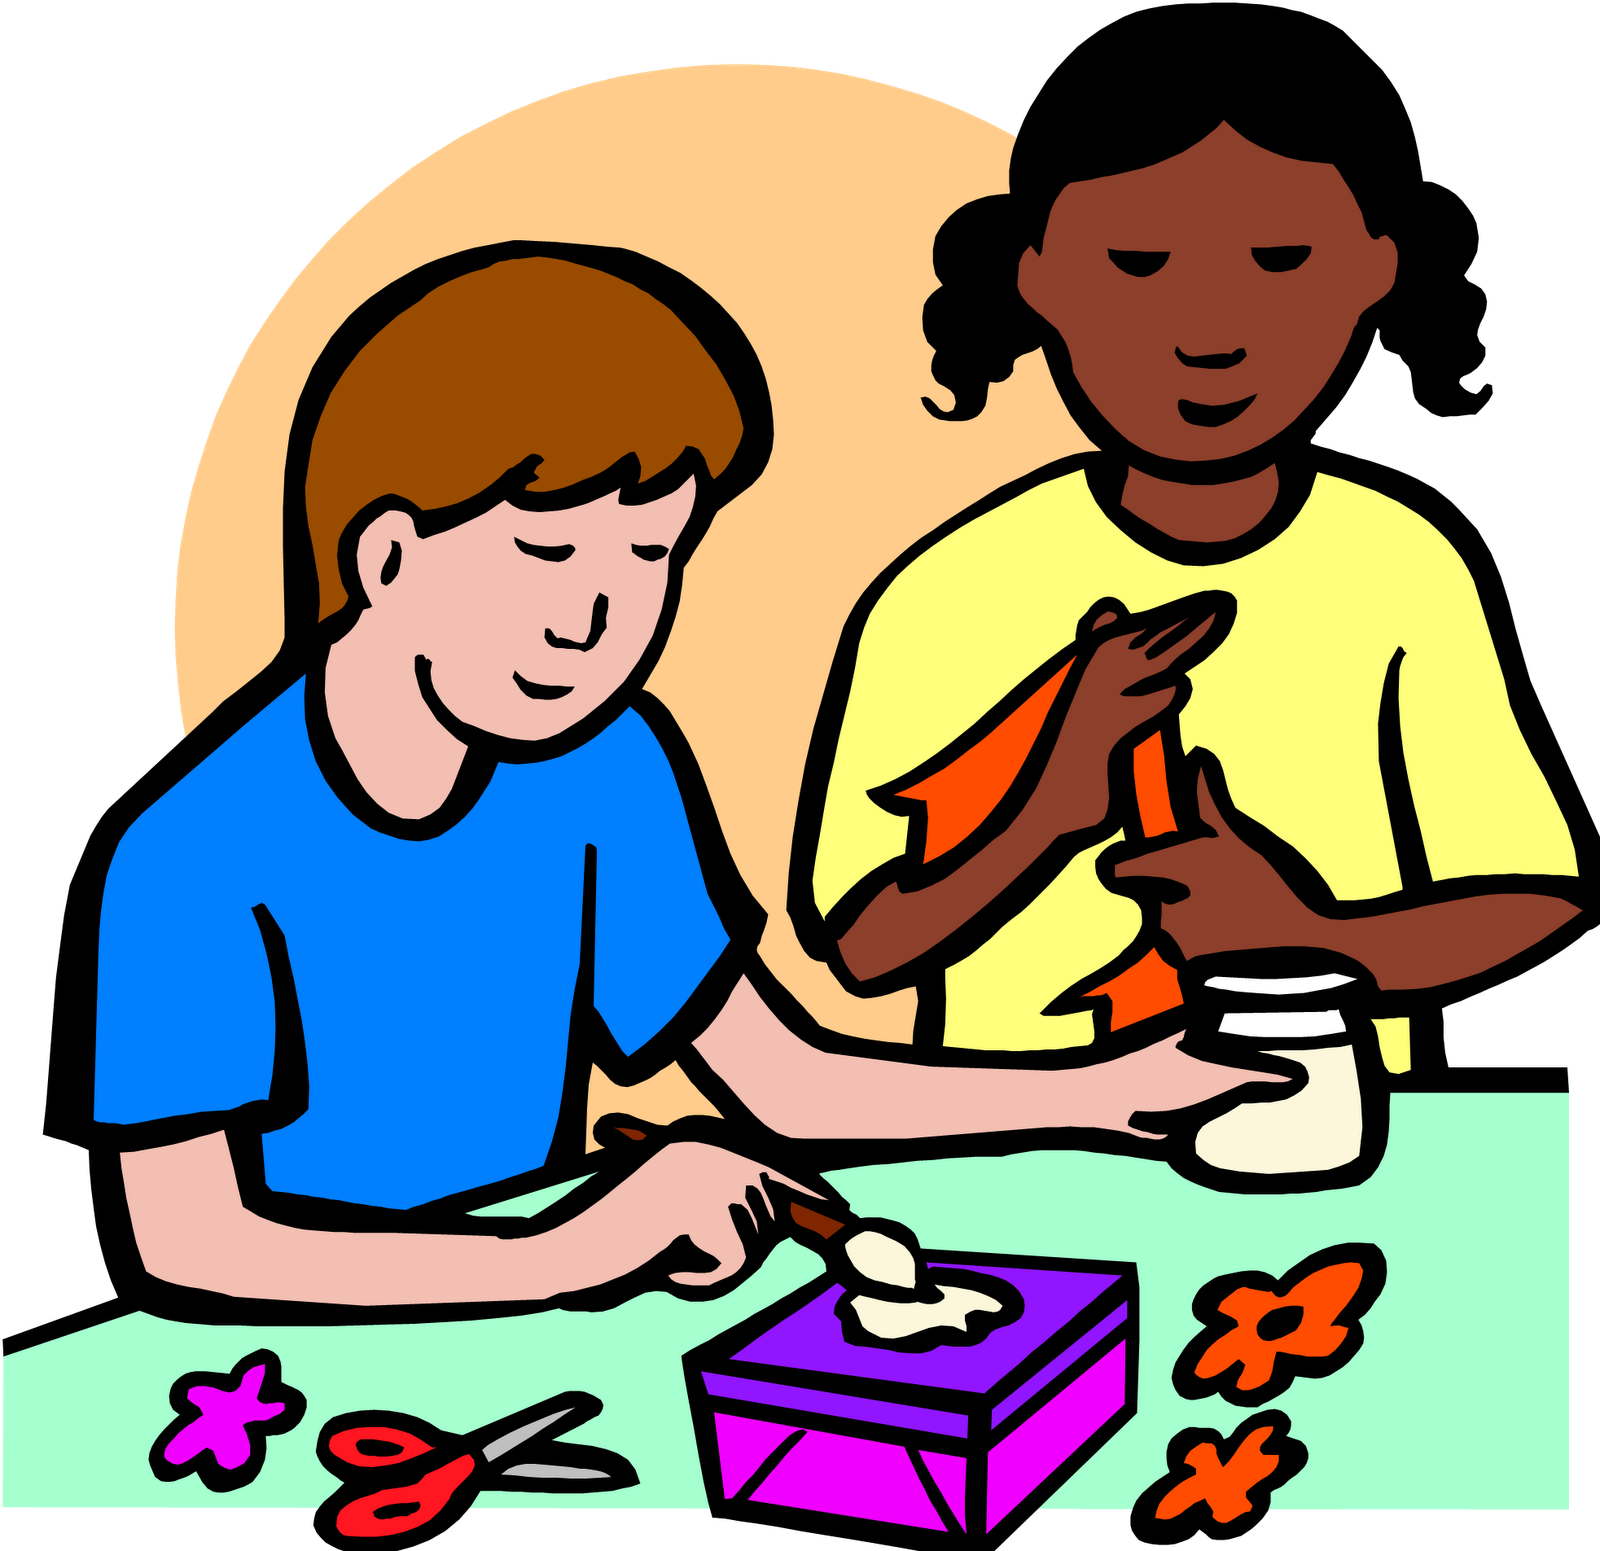 Boy and girl crafting.